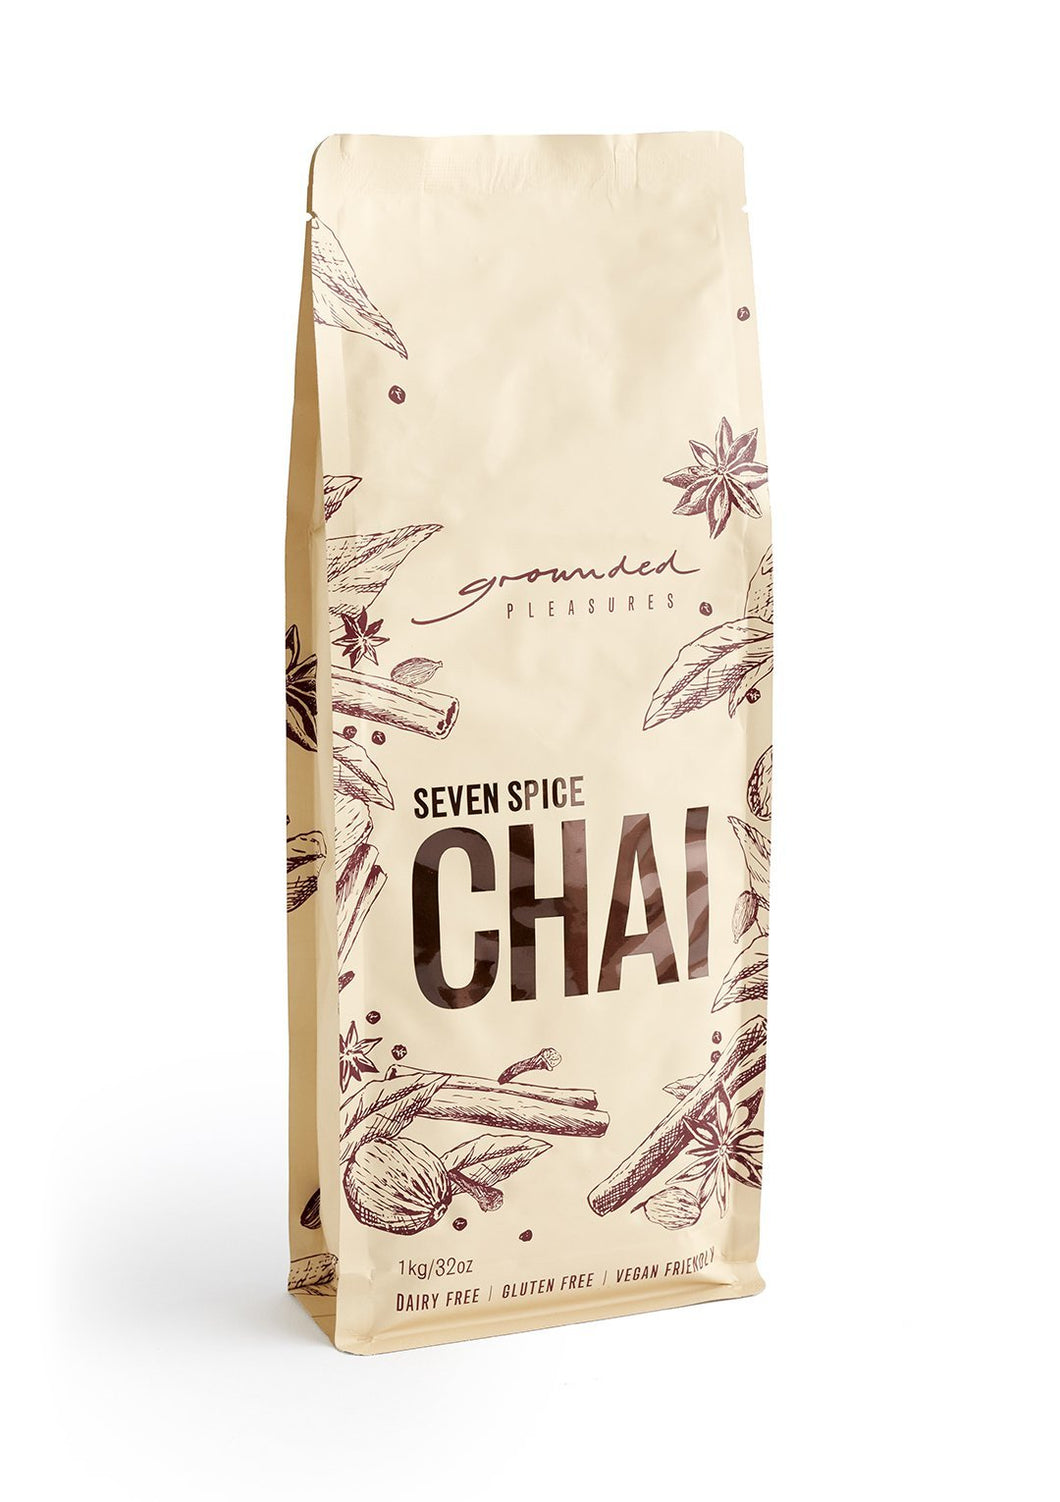 Seven Spice Chai by Grounded Pleasures